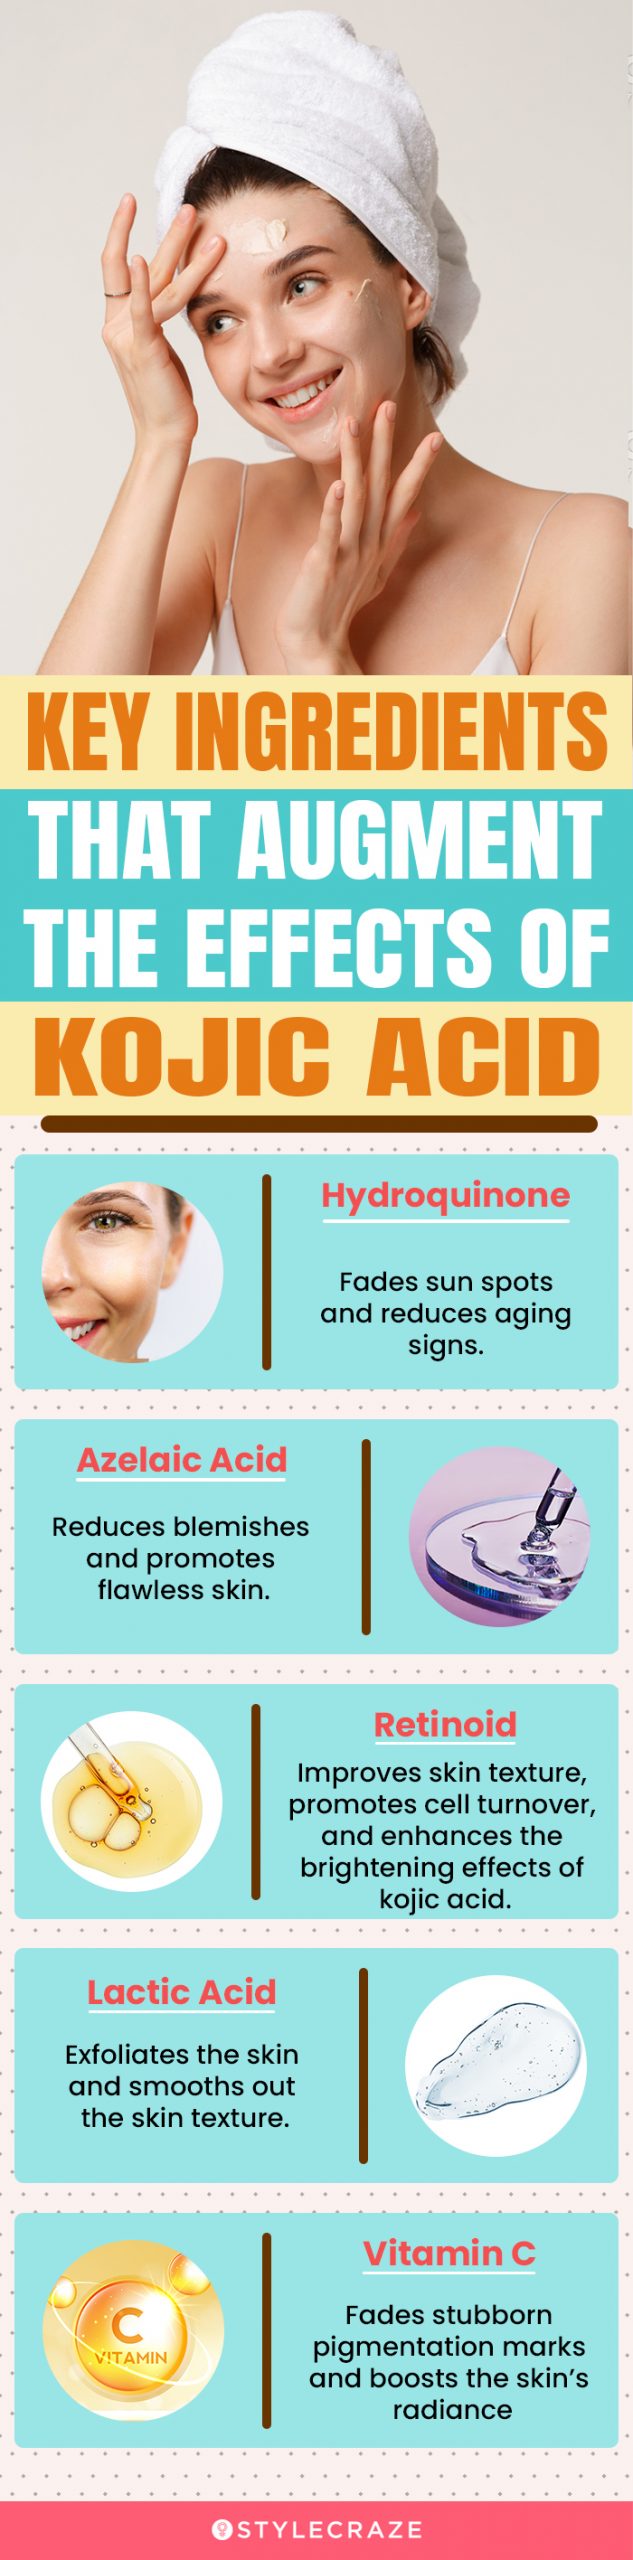 Key Ingredients That Augment The Effects Of Kojic Acid (infographic)